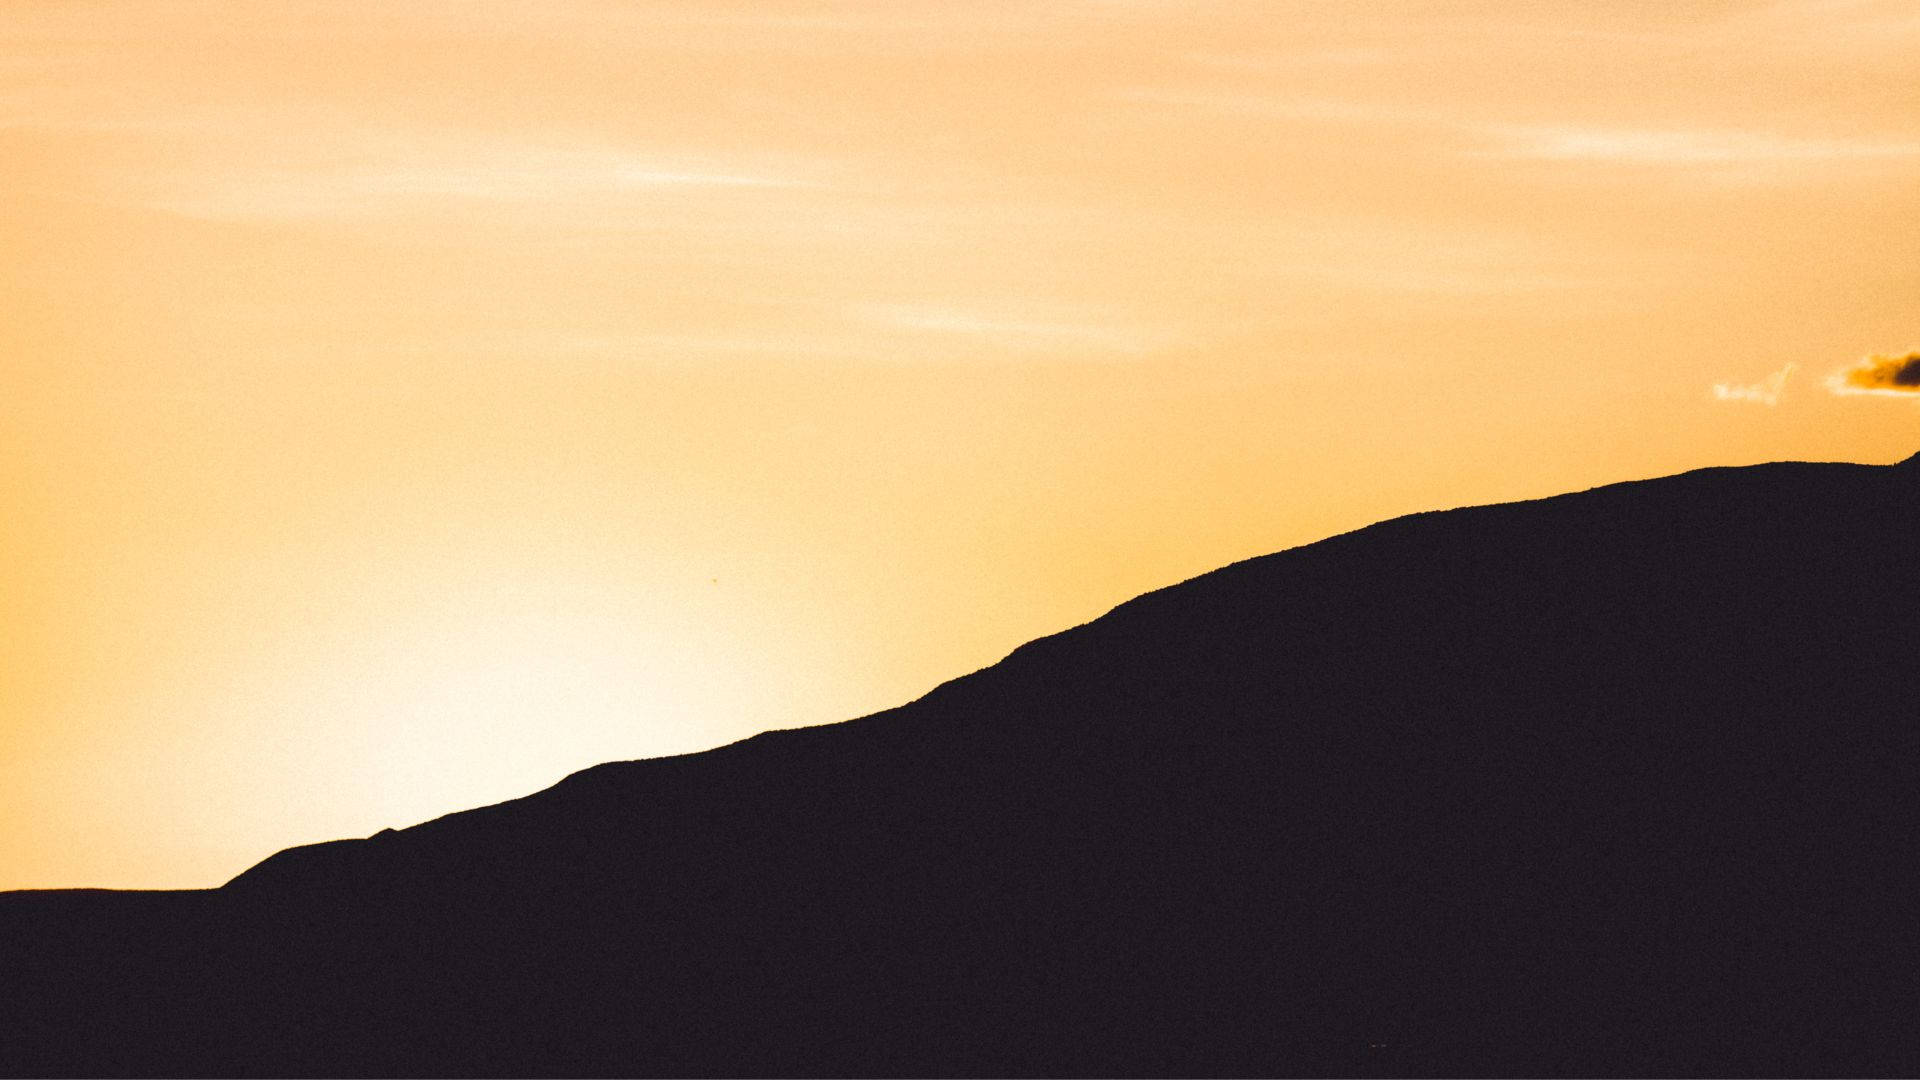 Cool Sunset Mountain Slope Silhouette Wallpaper